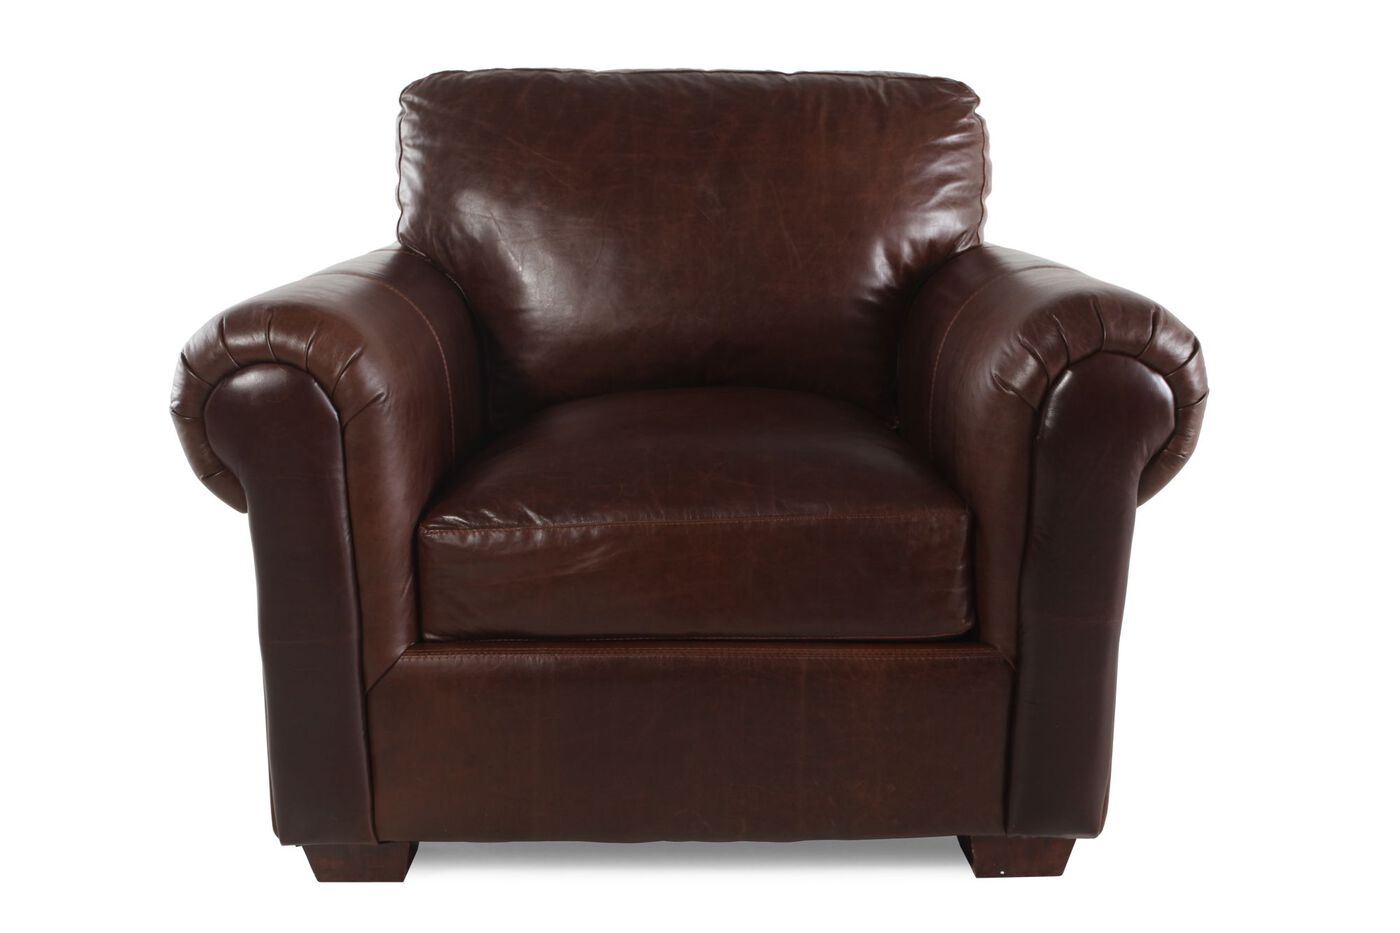 Rolled Arm Chair in Dark Russet Brown Mathis Brothers